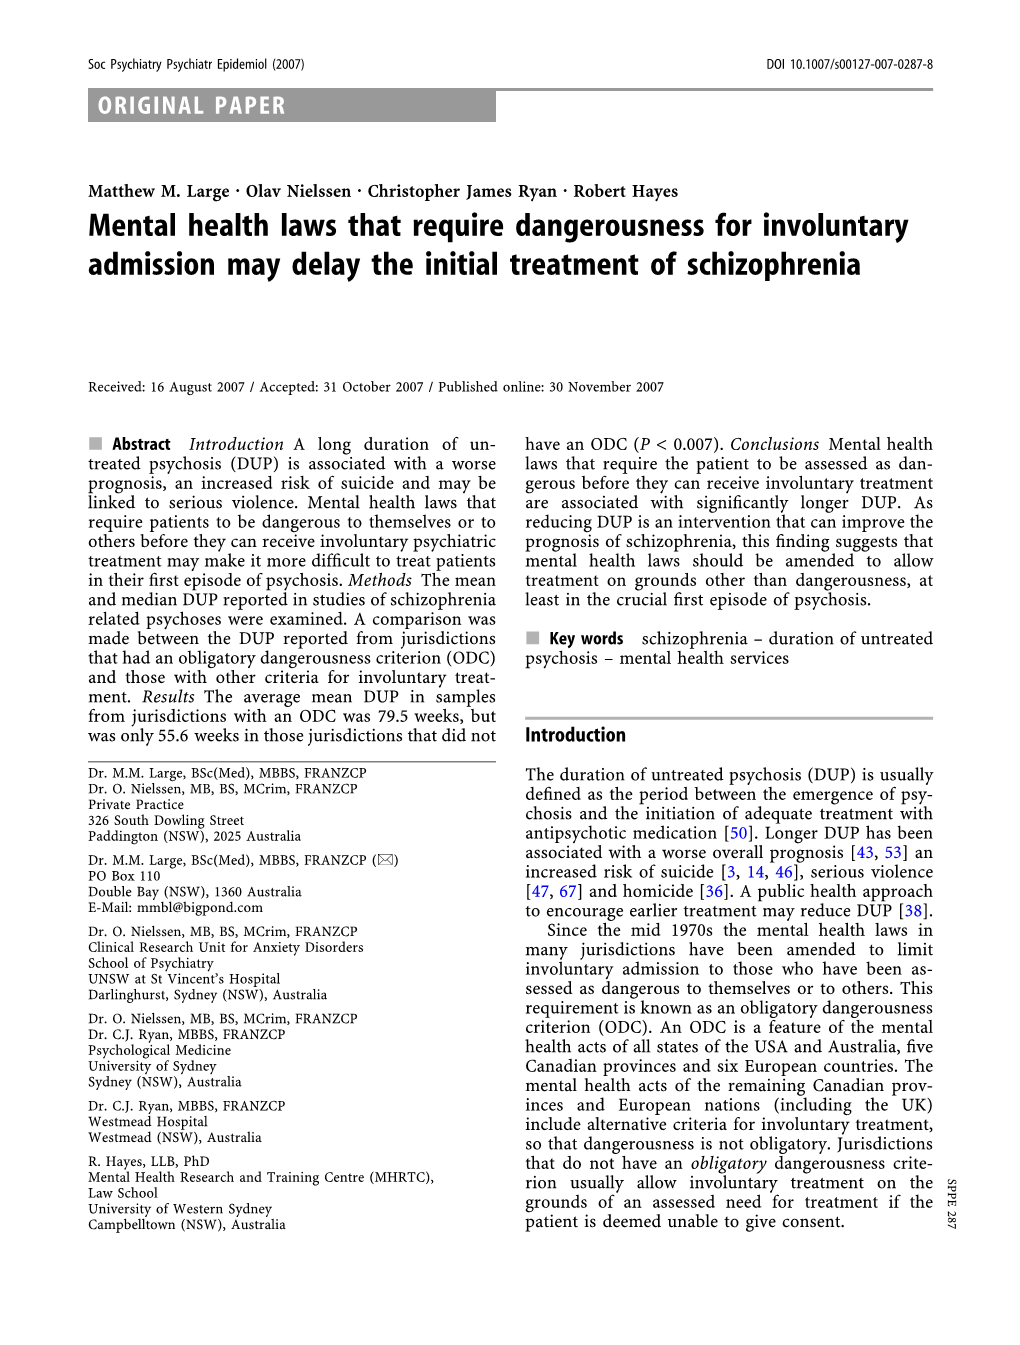 Mental Health Laws That Require Dangerousness for Involuntary Admission May Delay the Initial Treatment of Schizophrenia